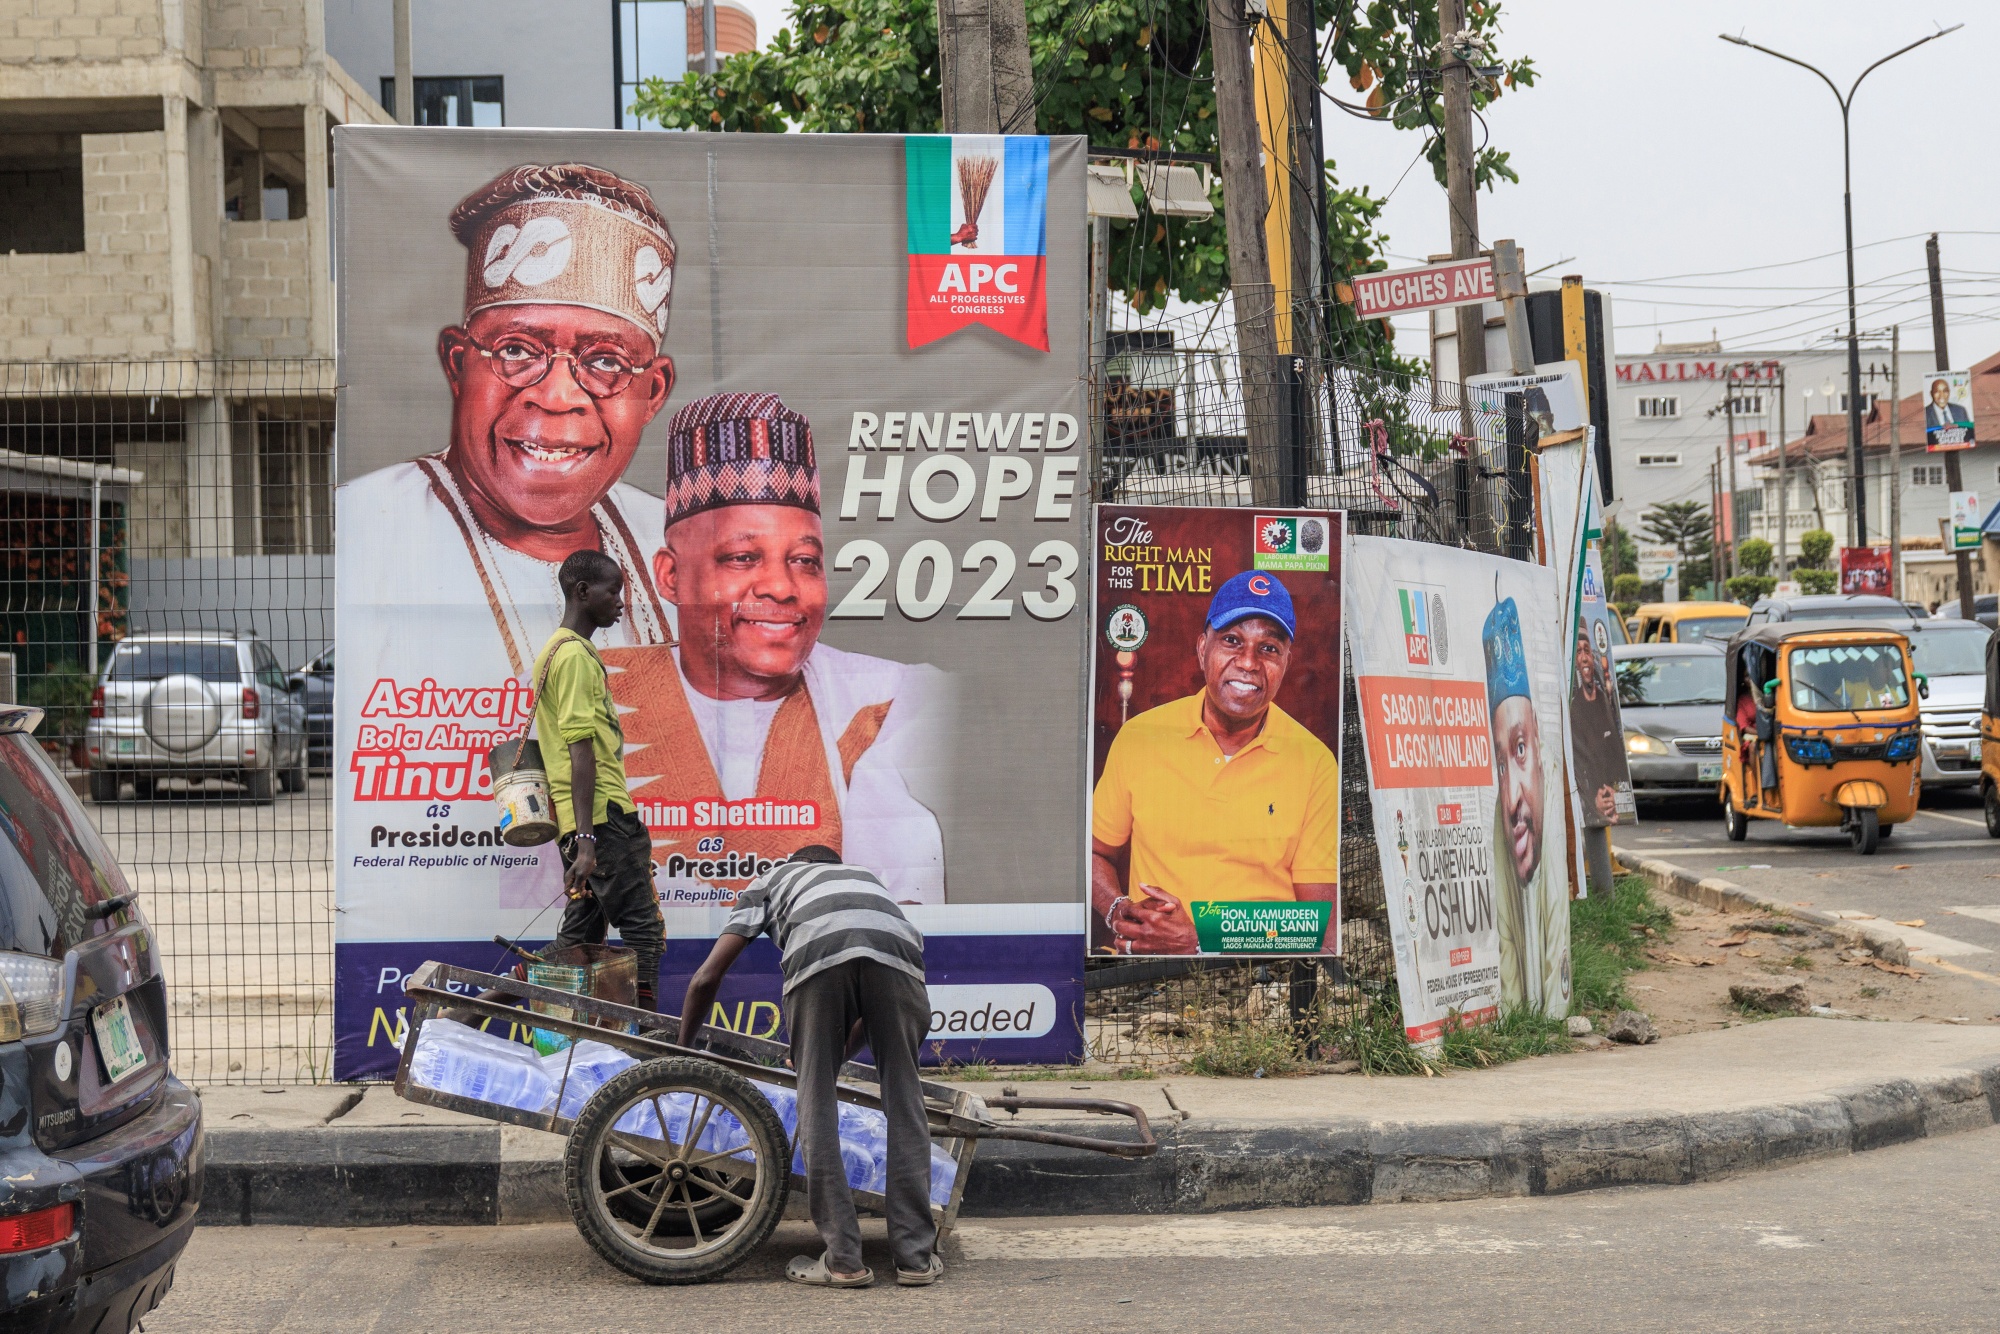 Election posters for Bola Tinubu and his running mate Kashim Shettima in the Yaba district of Lagos, Nigeria.